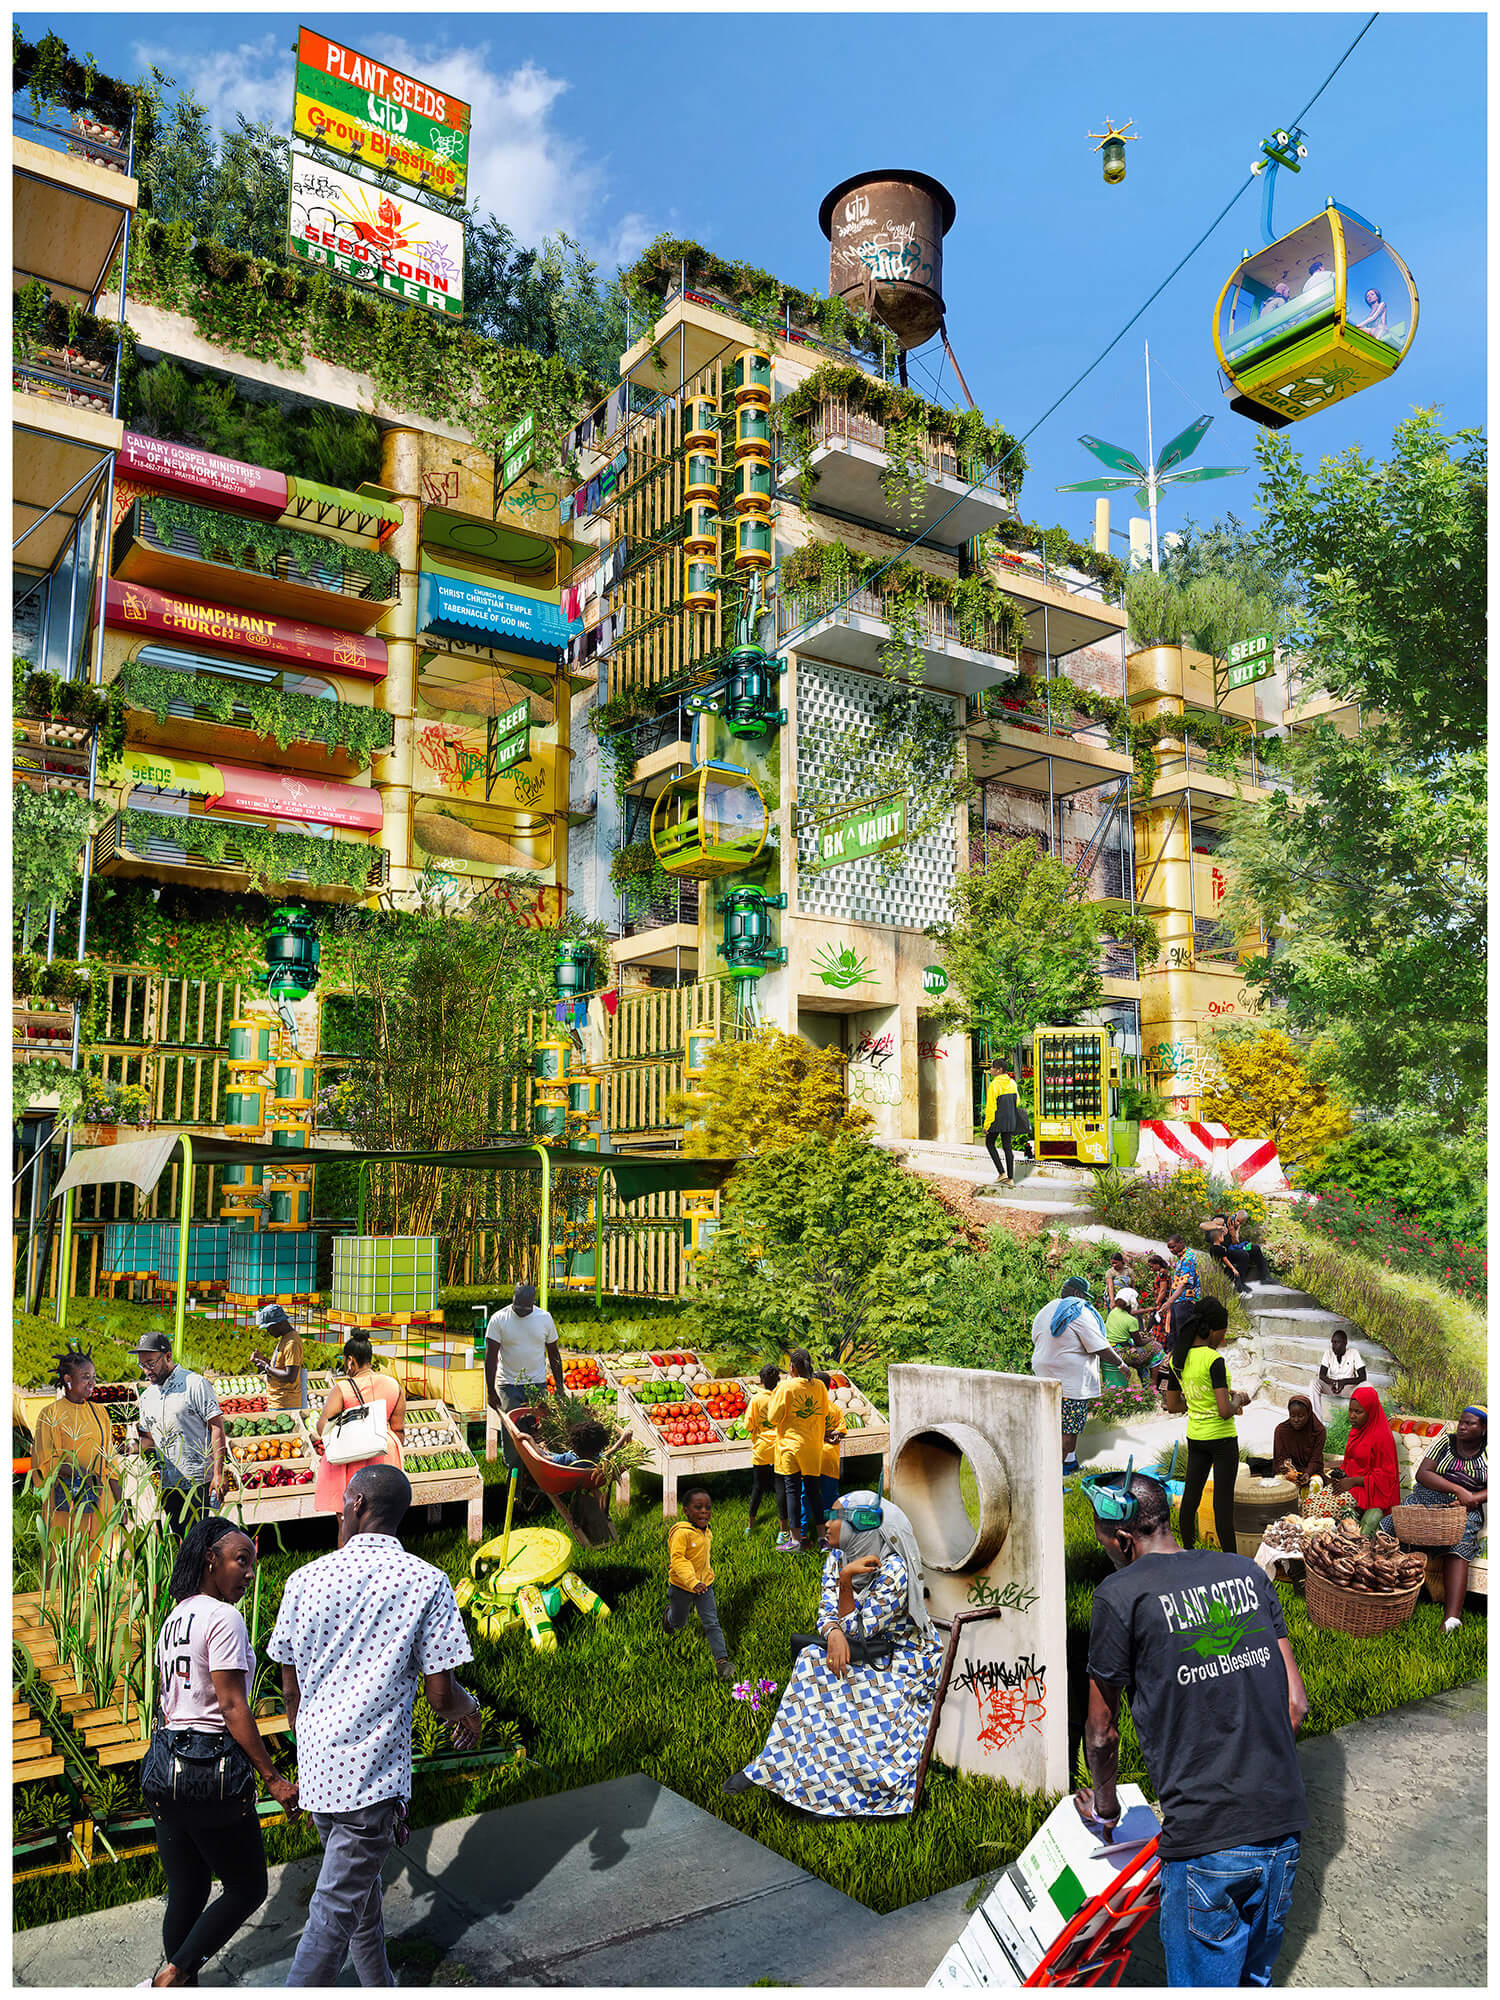 digital montage depicting a verdant future city with fruit stands in the foreground and a cable car up top